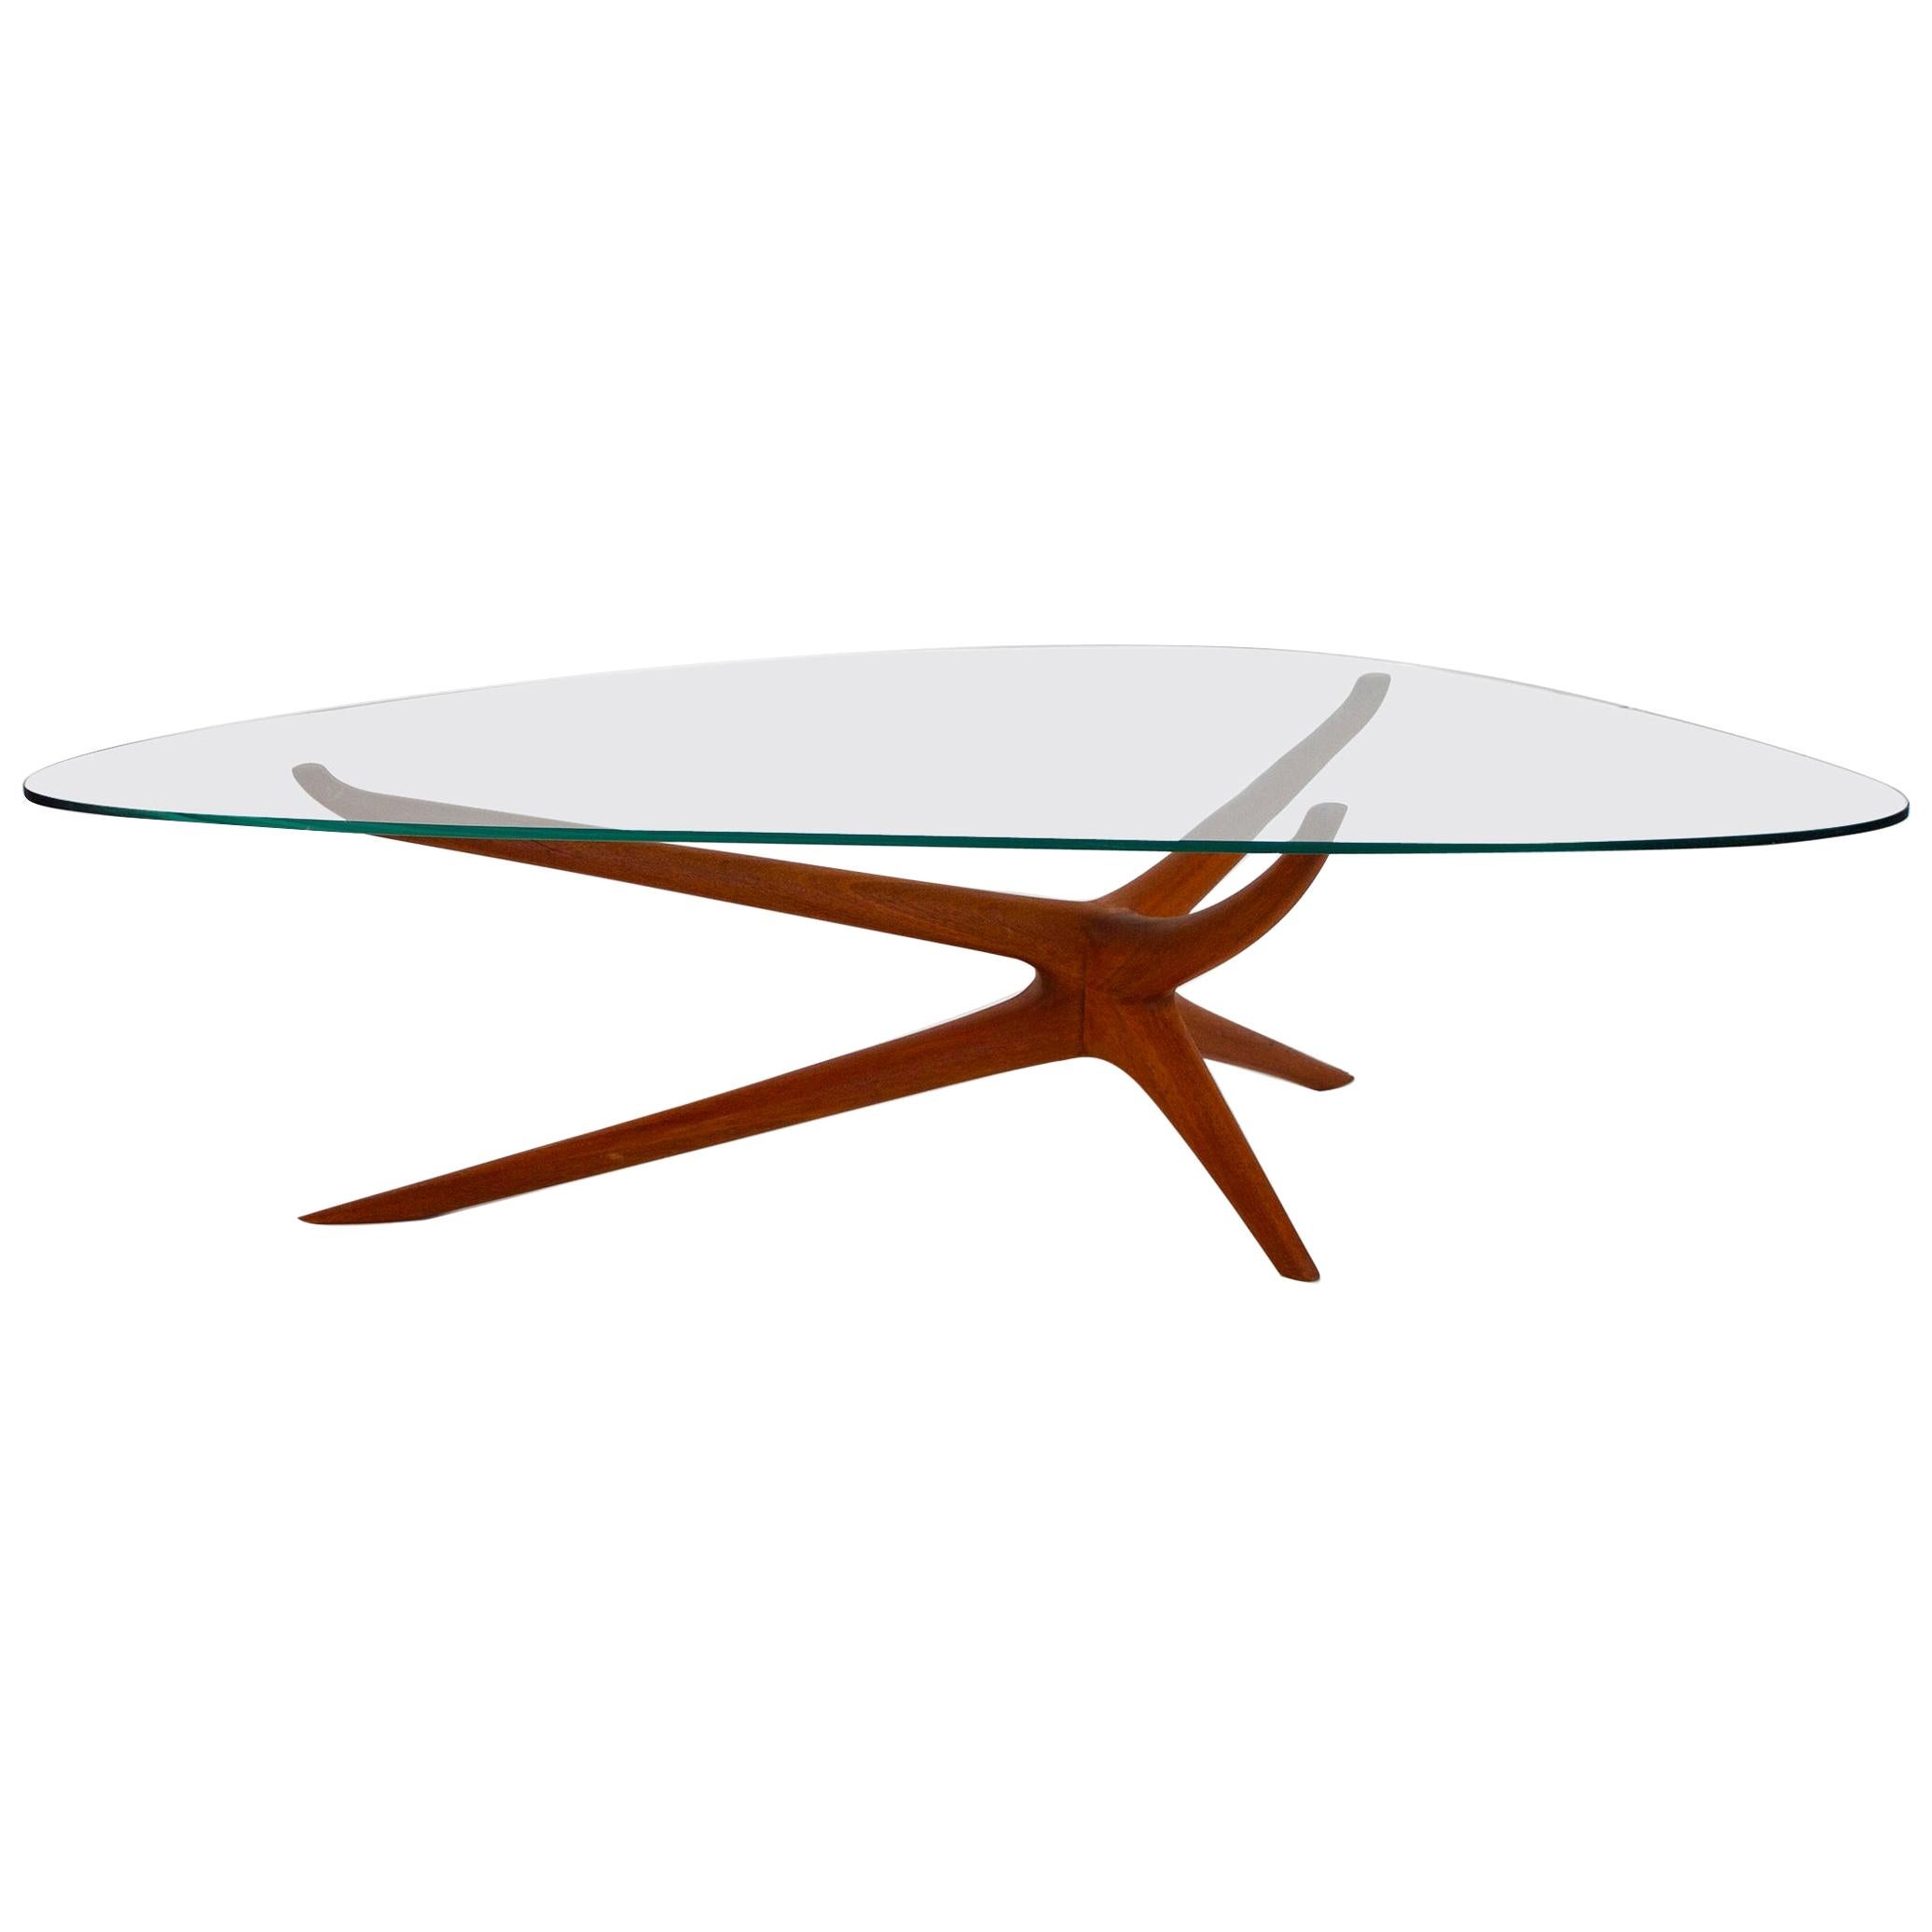 Mid-Century Modern Tri-Symmetric Organic Coffee Table in Mahogany with Glass Top